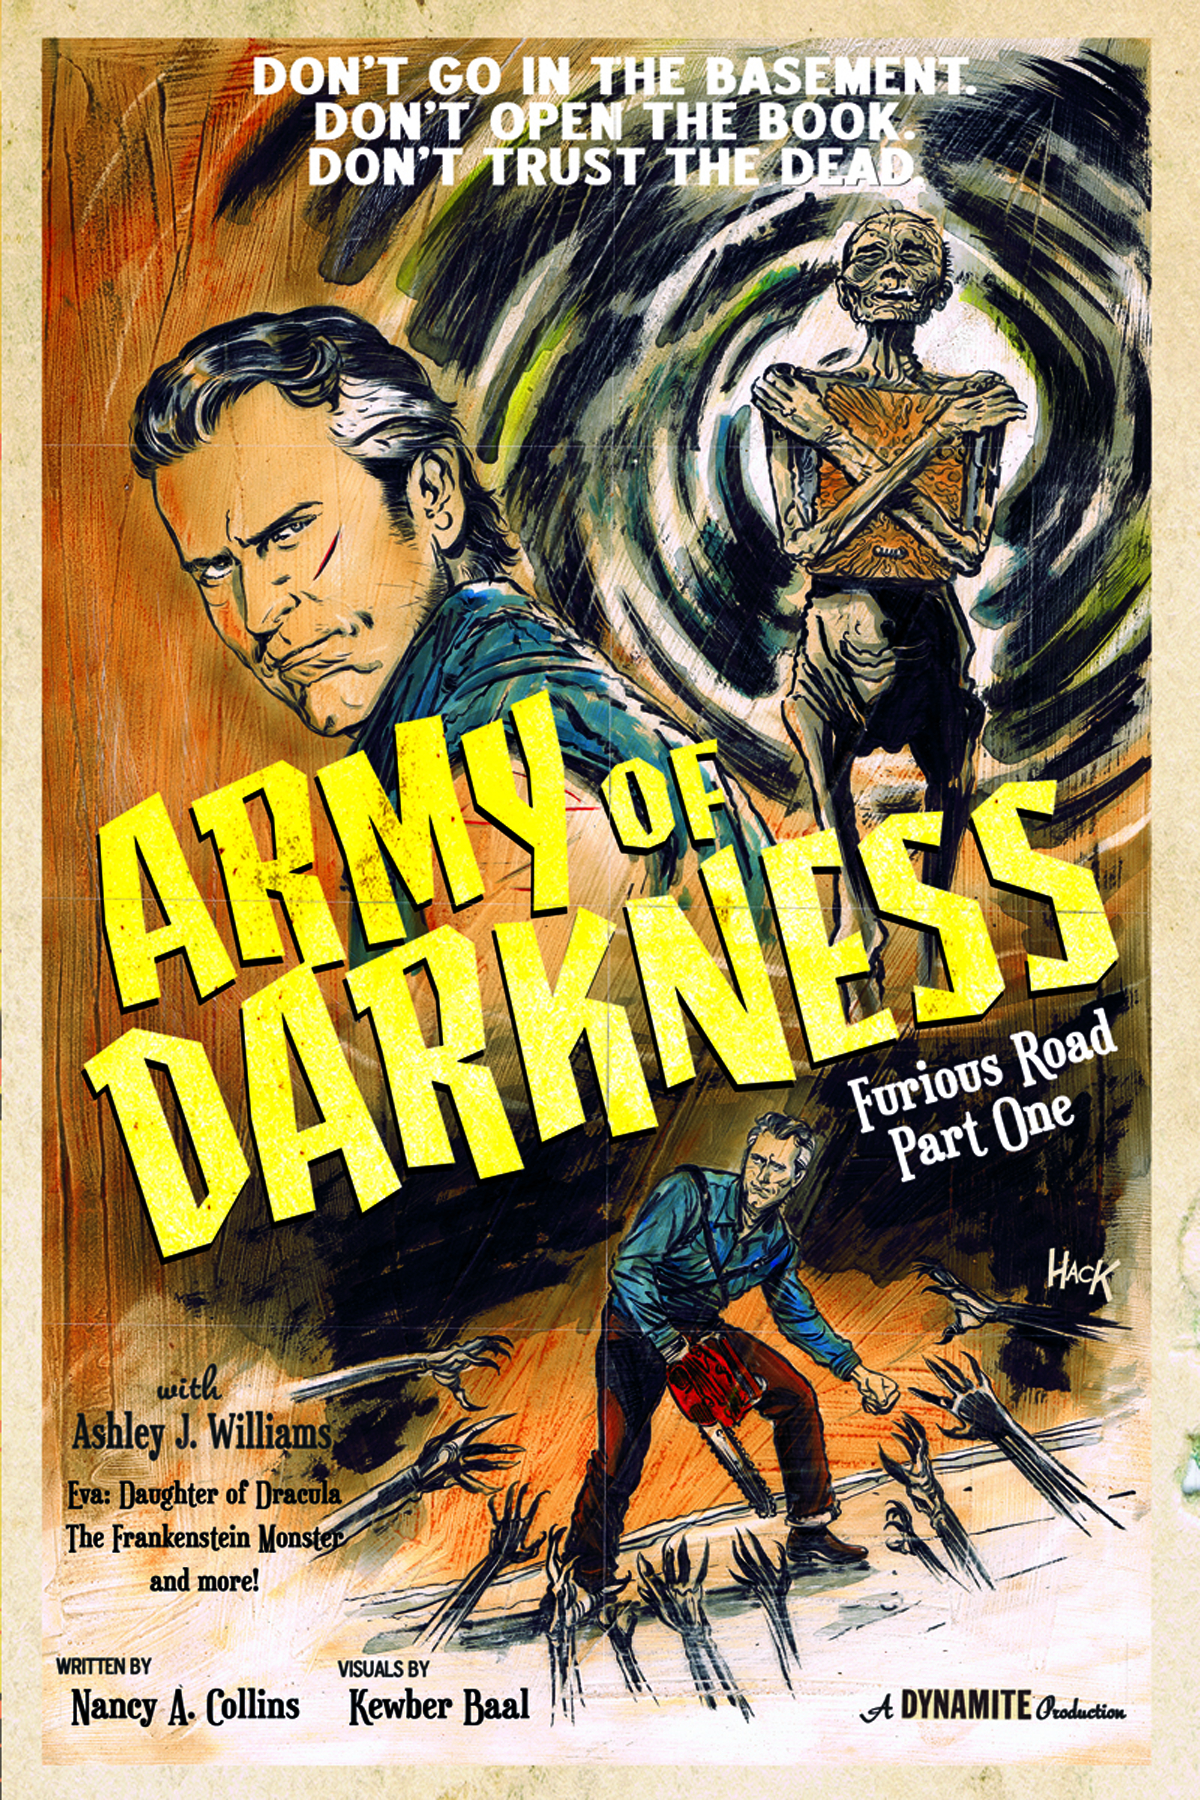 ARMY OF DARKNESS FURIOUS ROAD #1 (OF 6) CVR E SUBSCRIPTION